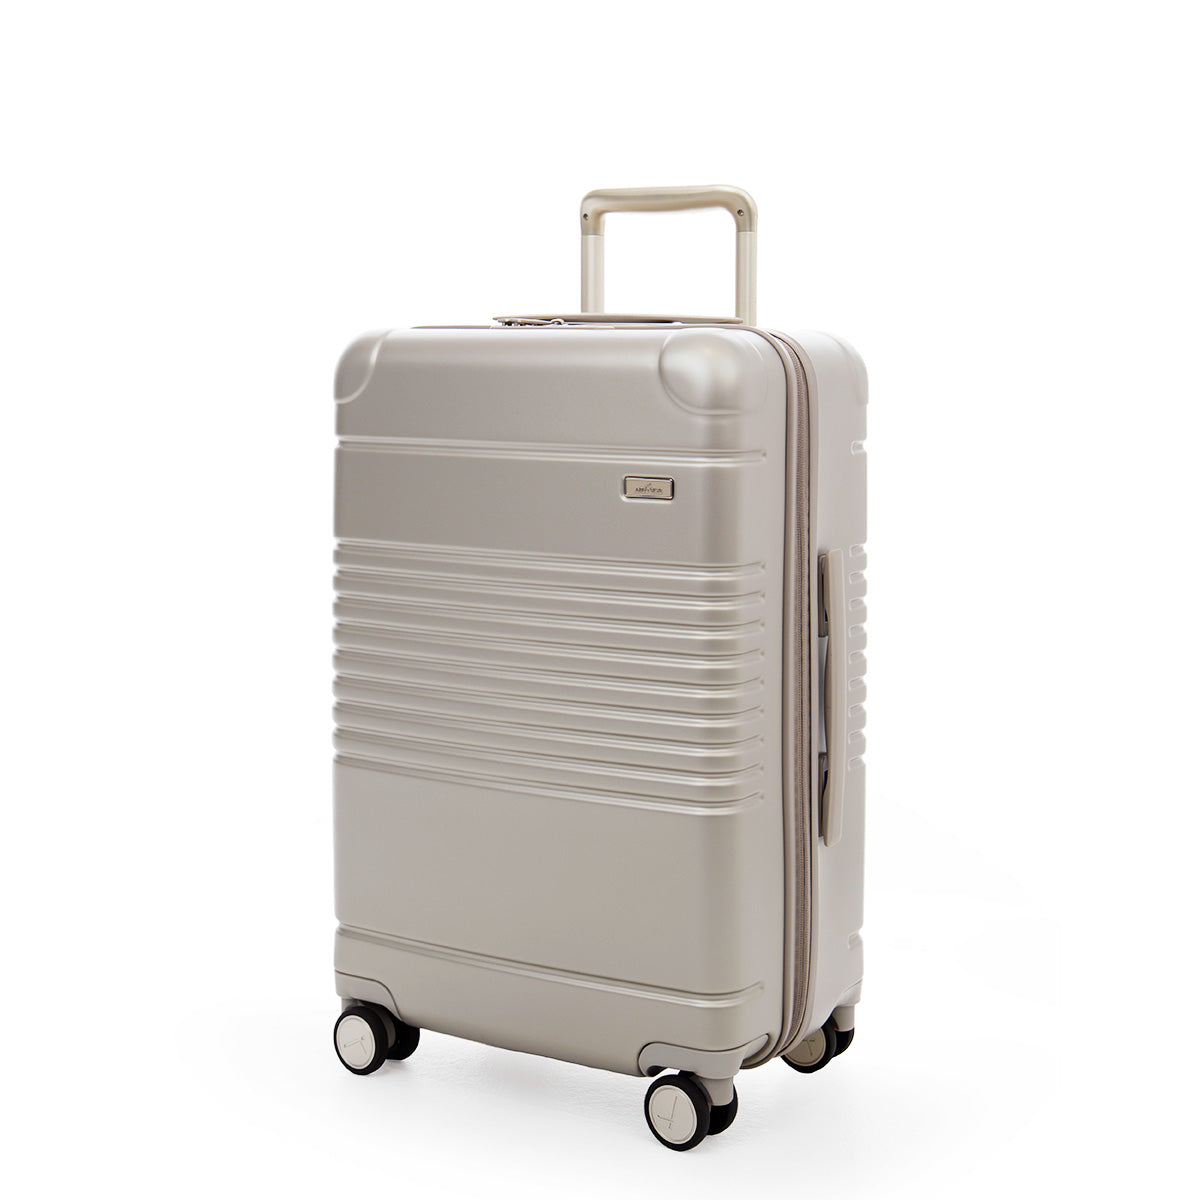 zipper carry-on max in champagne color - side angle view